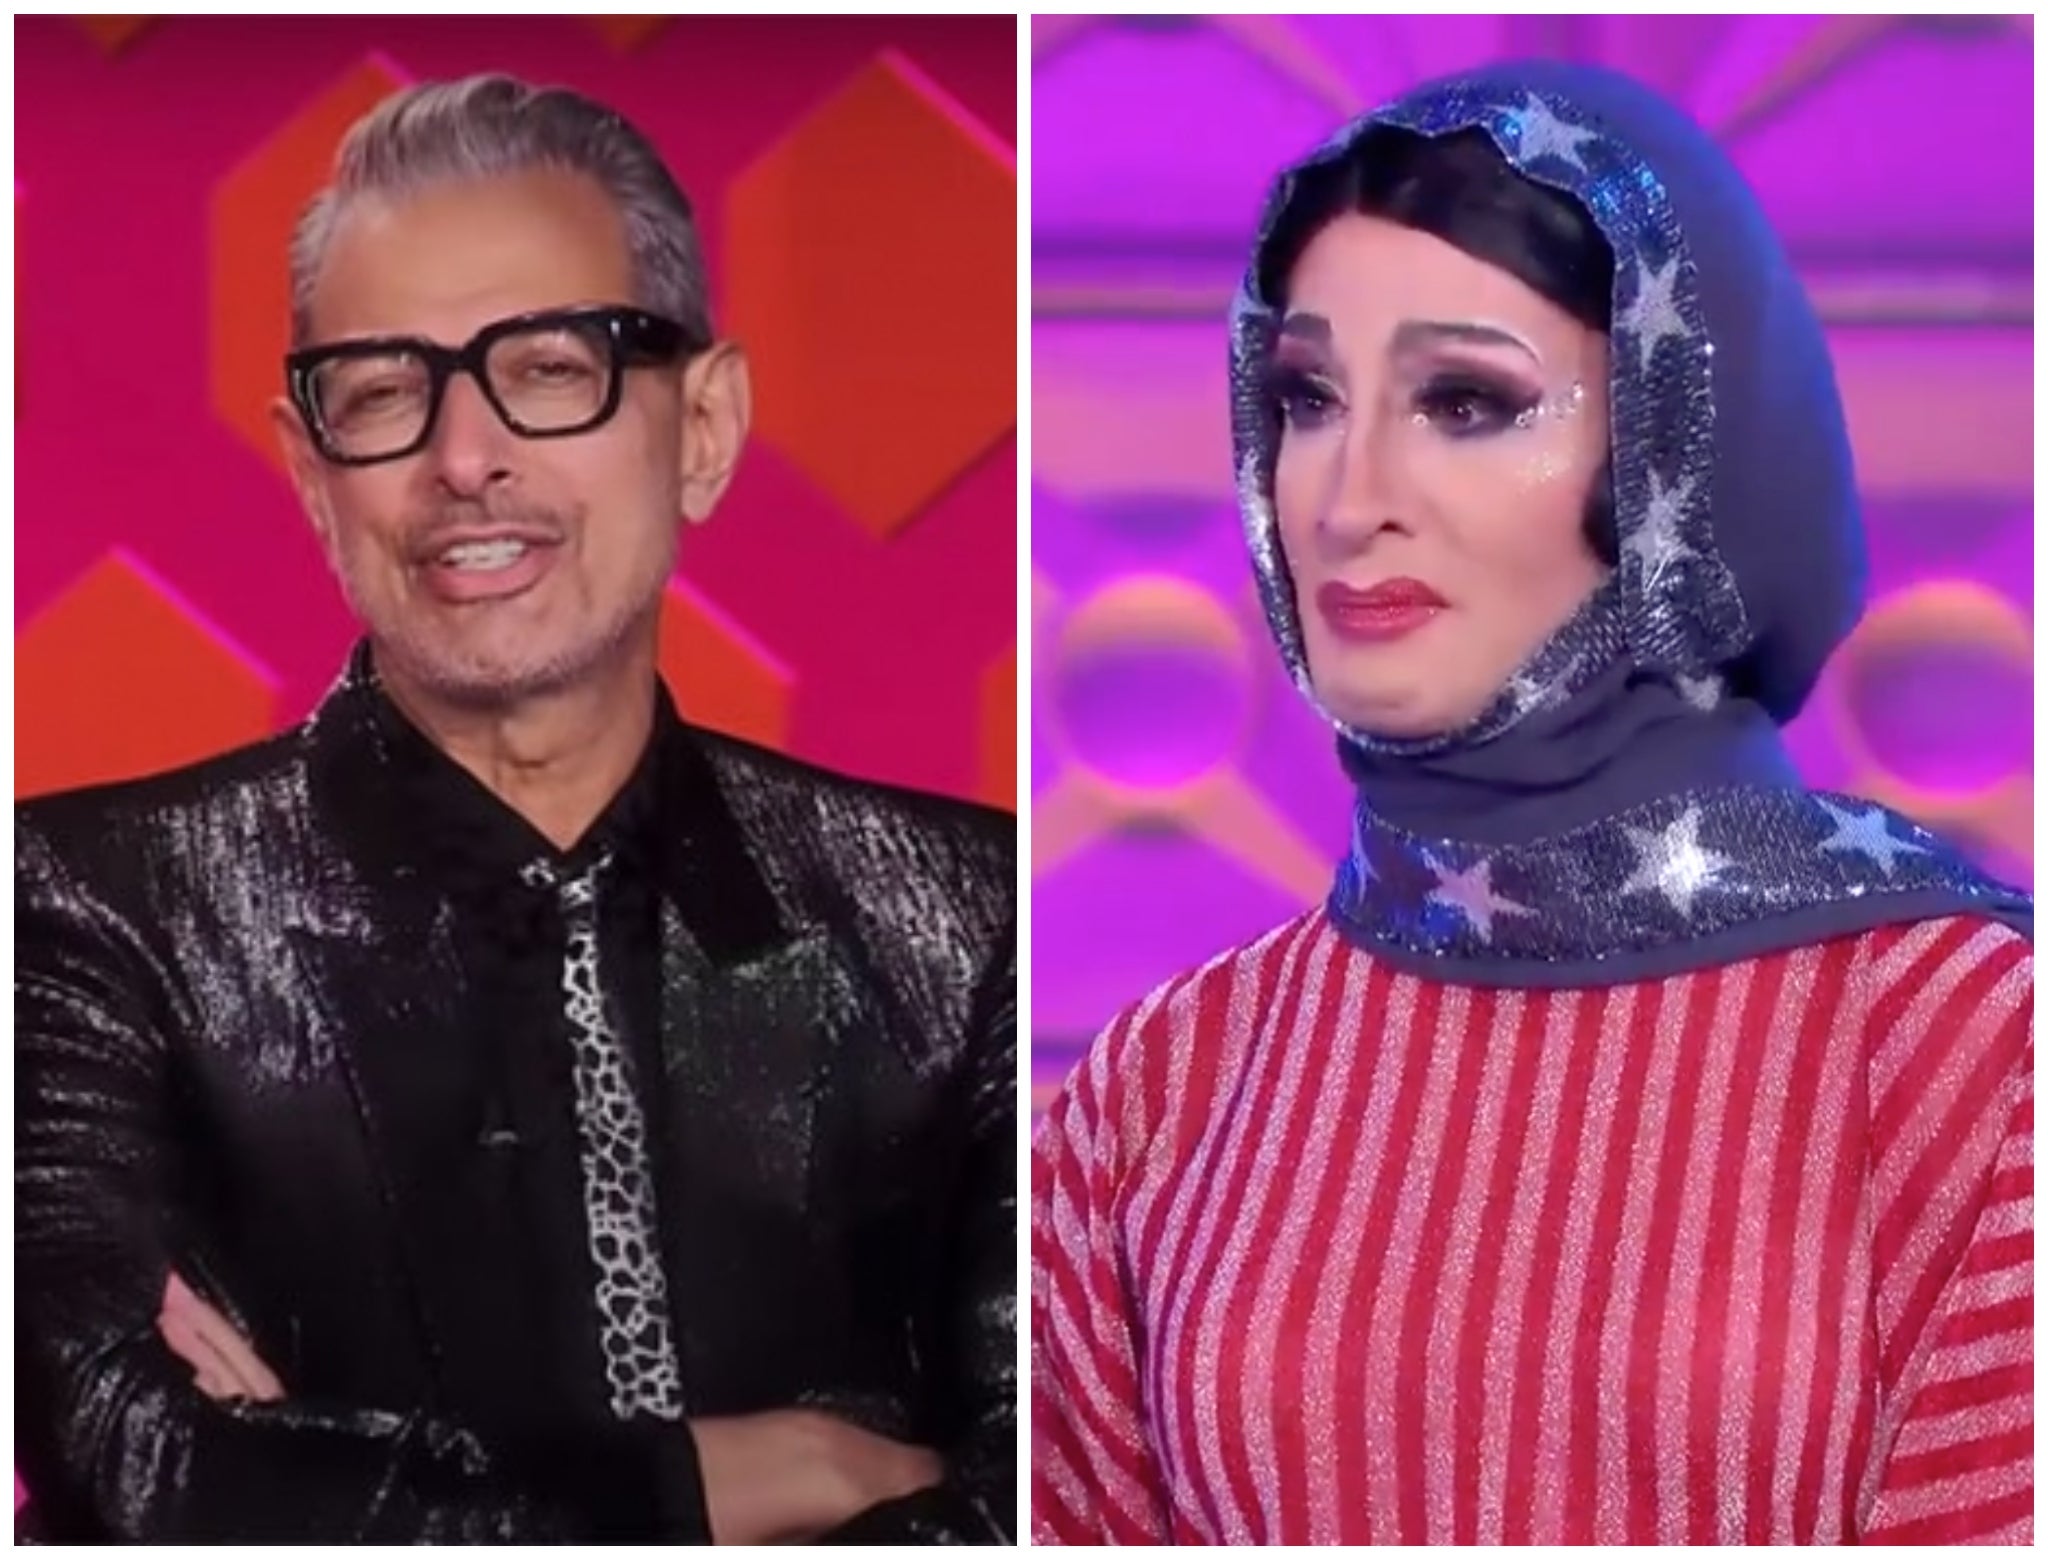 RuPauls Drag Race Jeff Goldblum receives backlash for Islam comments to Jackie Cox The Independent The Independent image